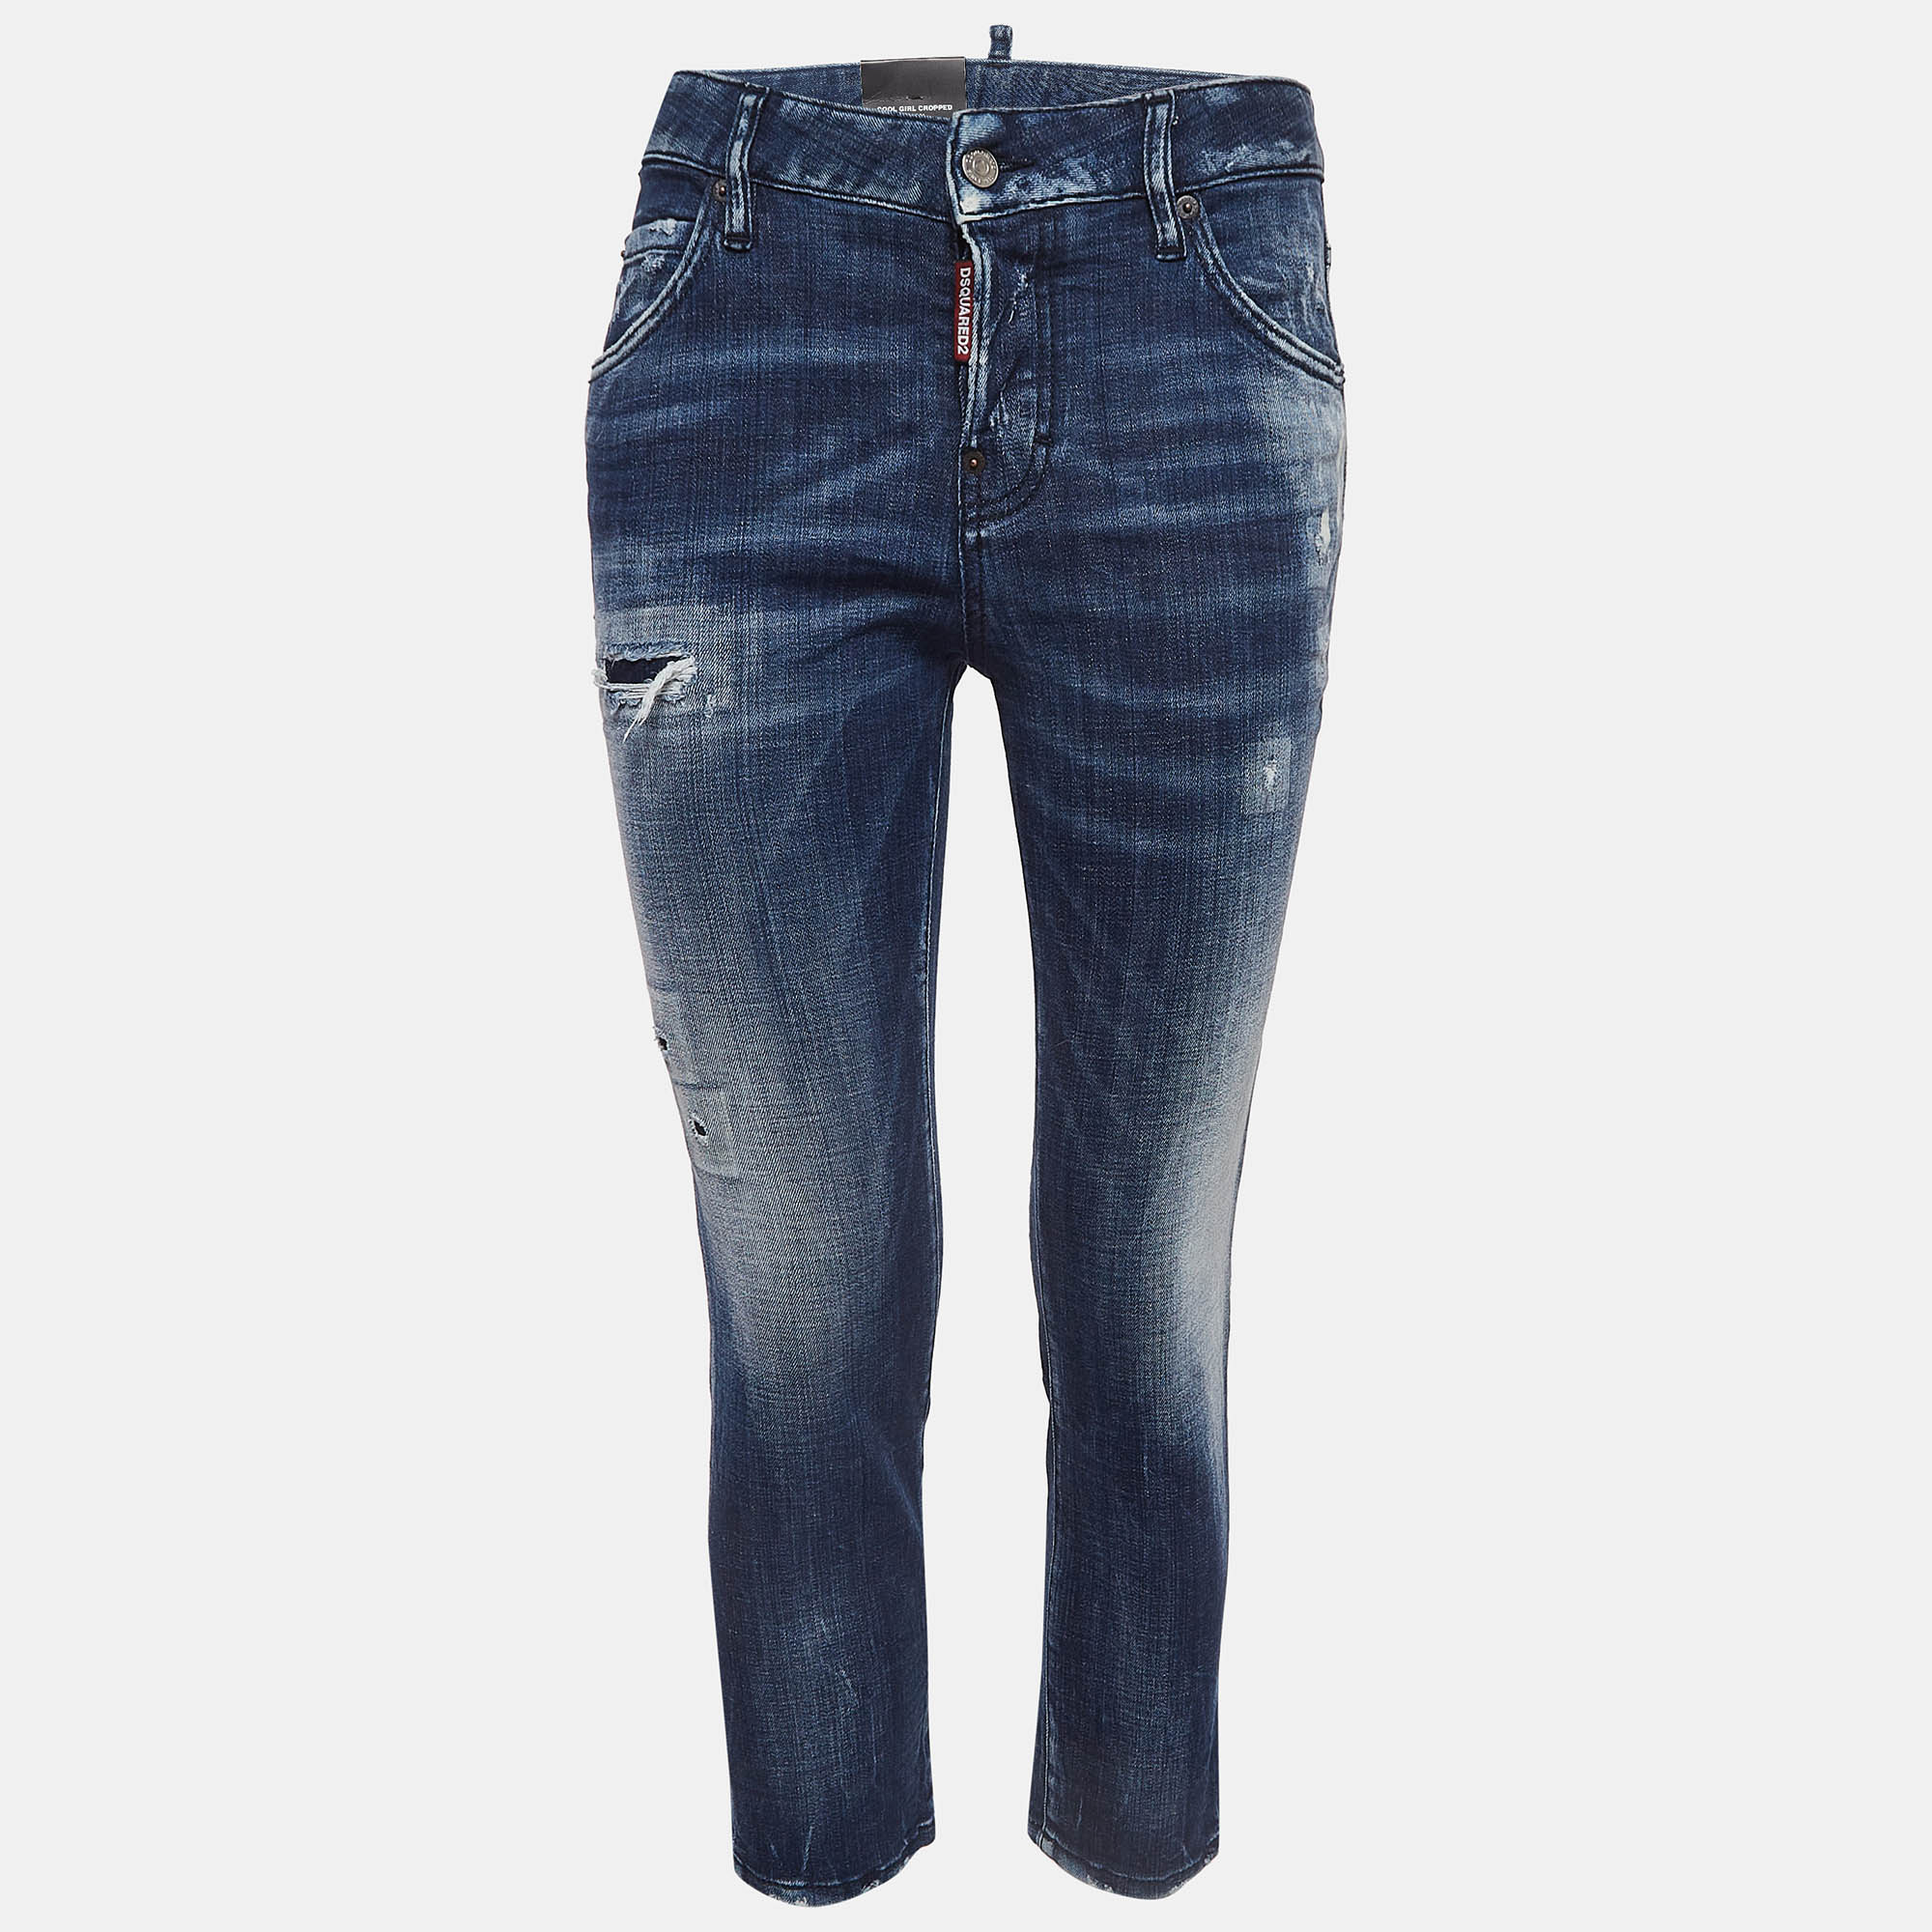 

Dsquared2 Blue Distressed Denim Cropped Jeans S Waist 33"